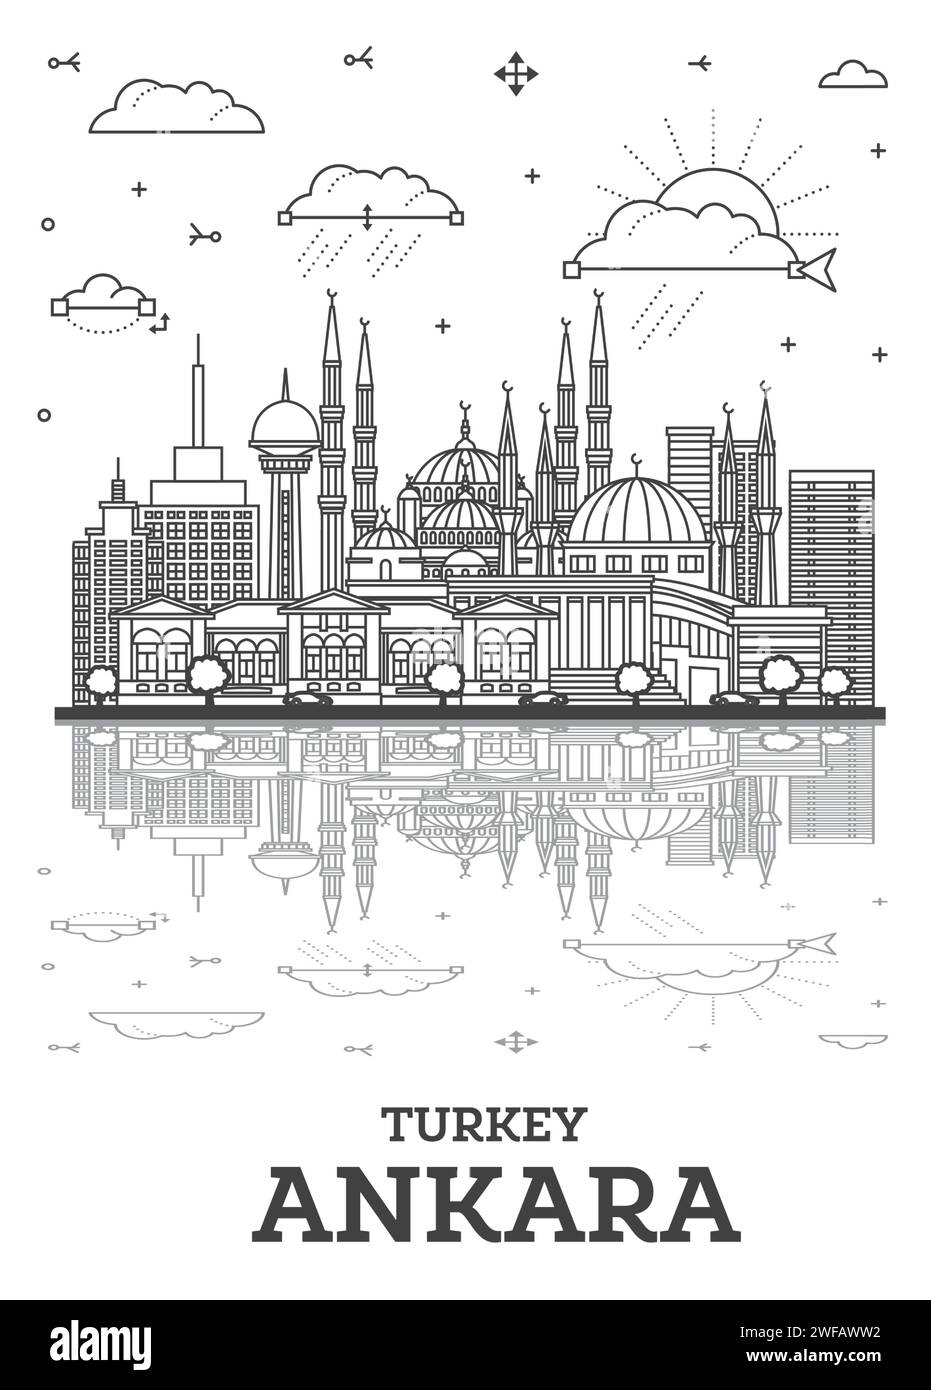 Outline Ankara Turkey City Skyline with Historic Buildings and Reflections Isolated on White. Vector Illustration. Ankara Cityscape with Landmarks. Stock Vector